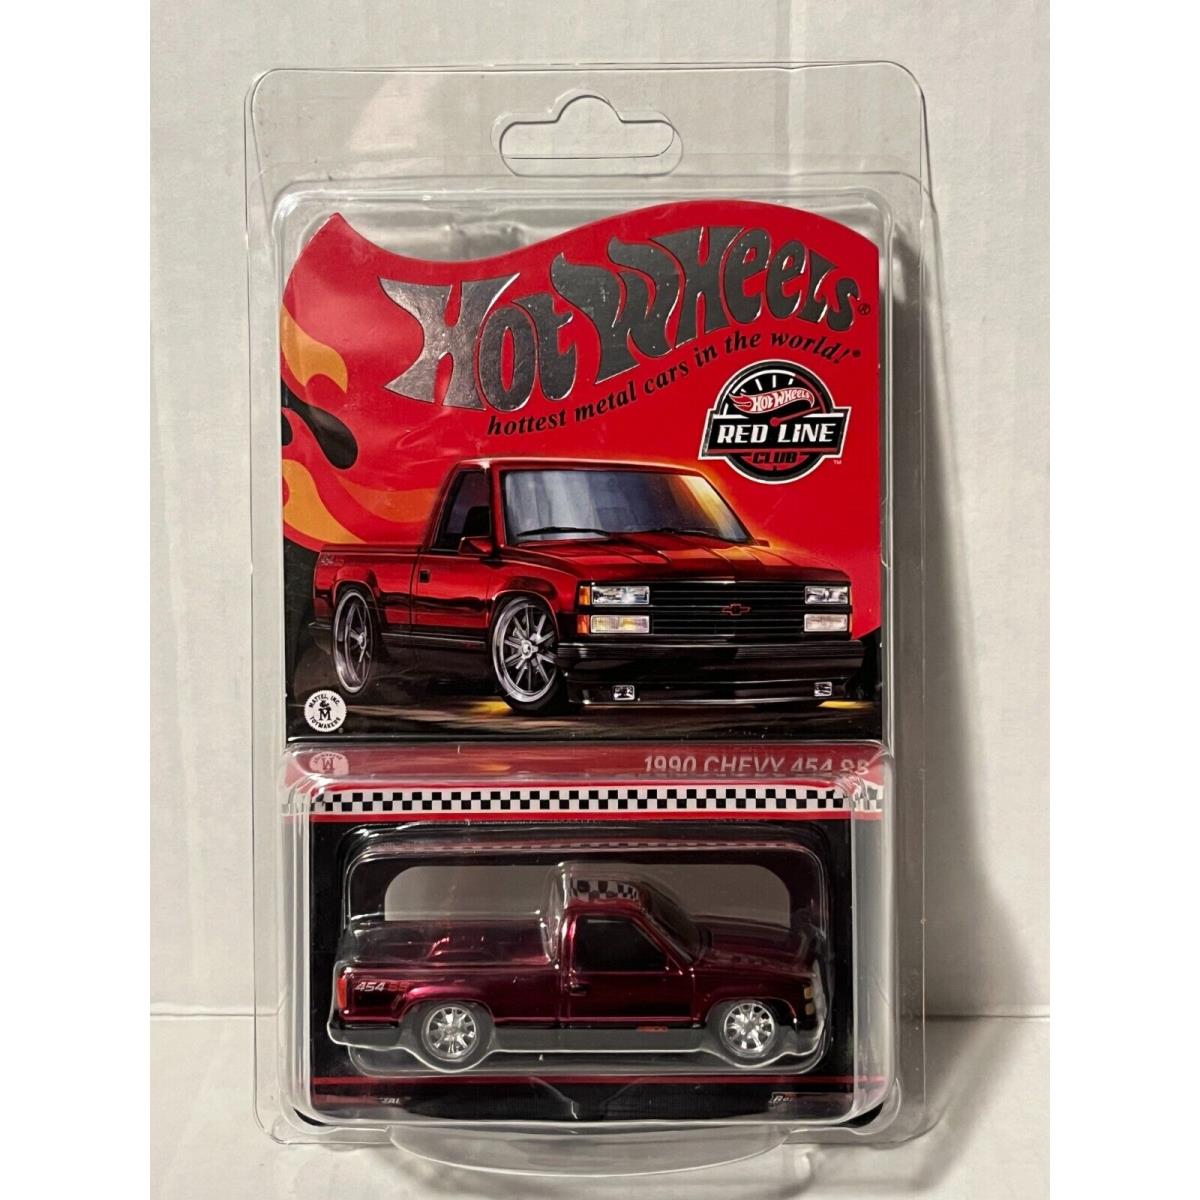 Hot Wheels 2023 Collectors Rlc Exclusive 1990 Chevy 454 SS Red